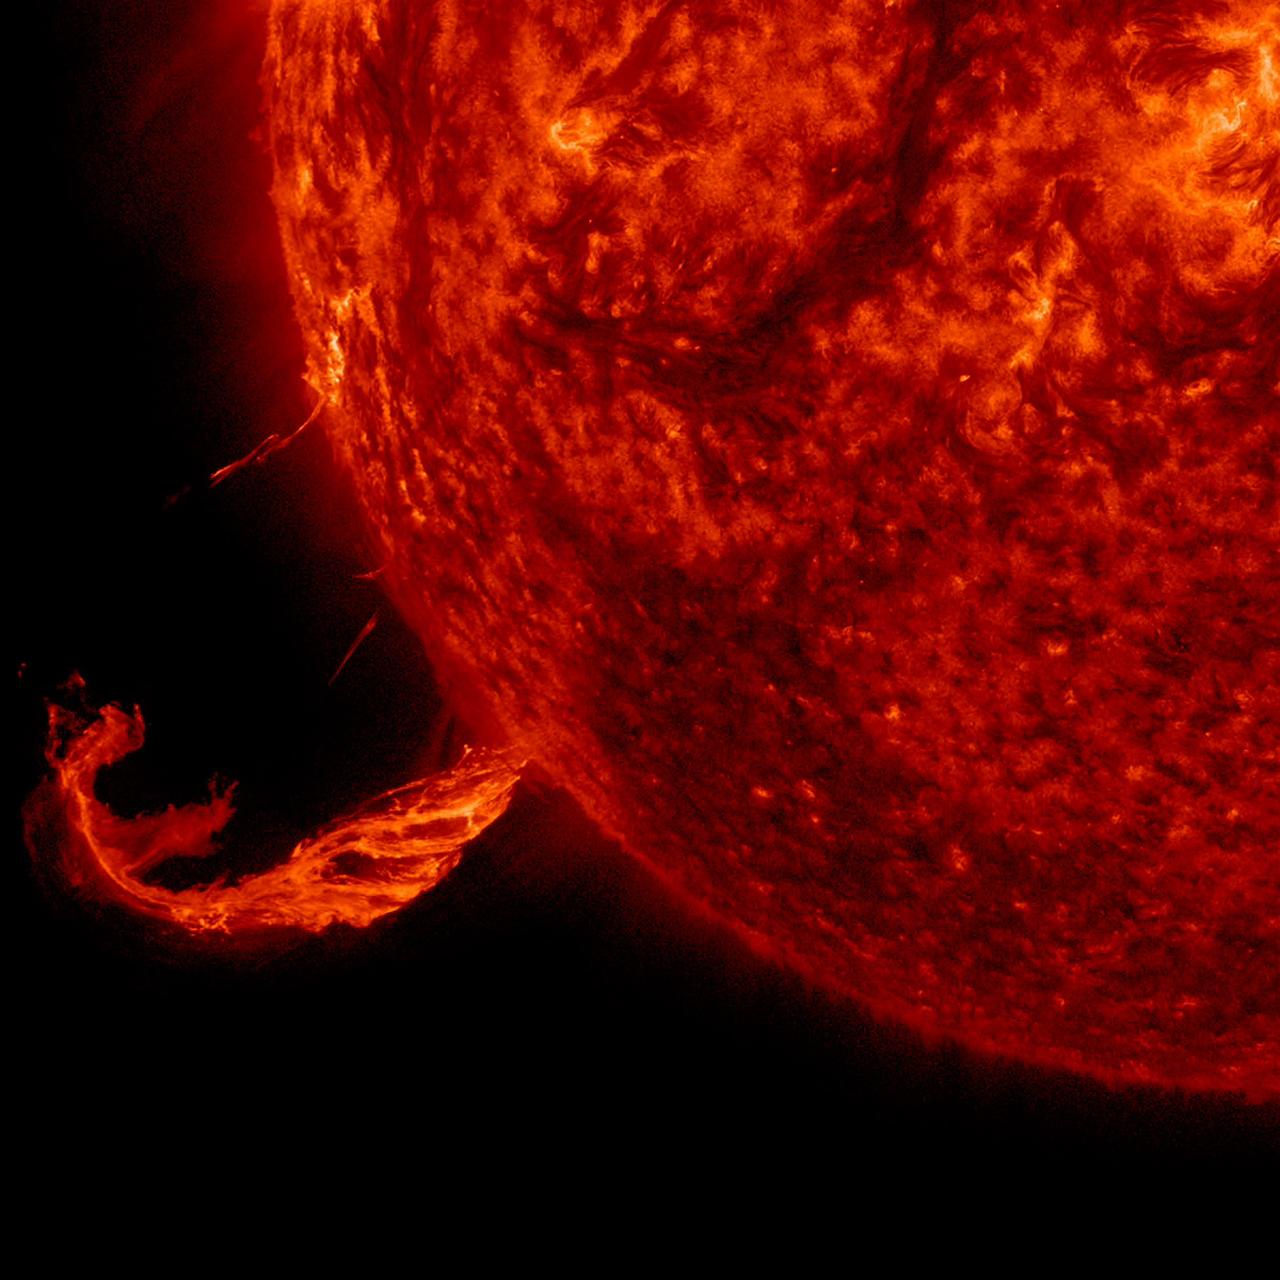 A coronal mass ejection from the Sun can fling radiation, charged solar particles, toward the Earth.